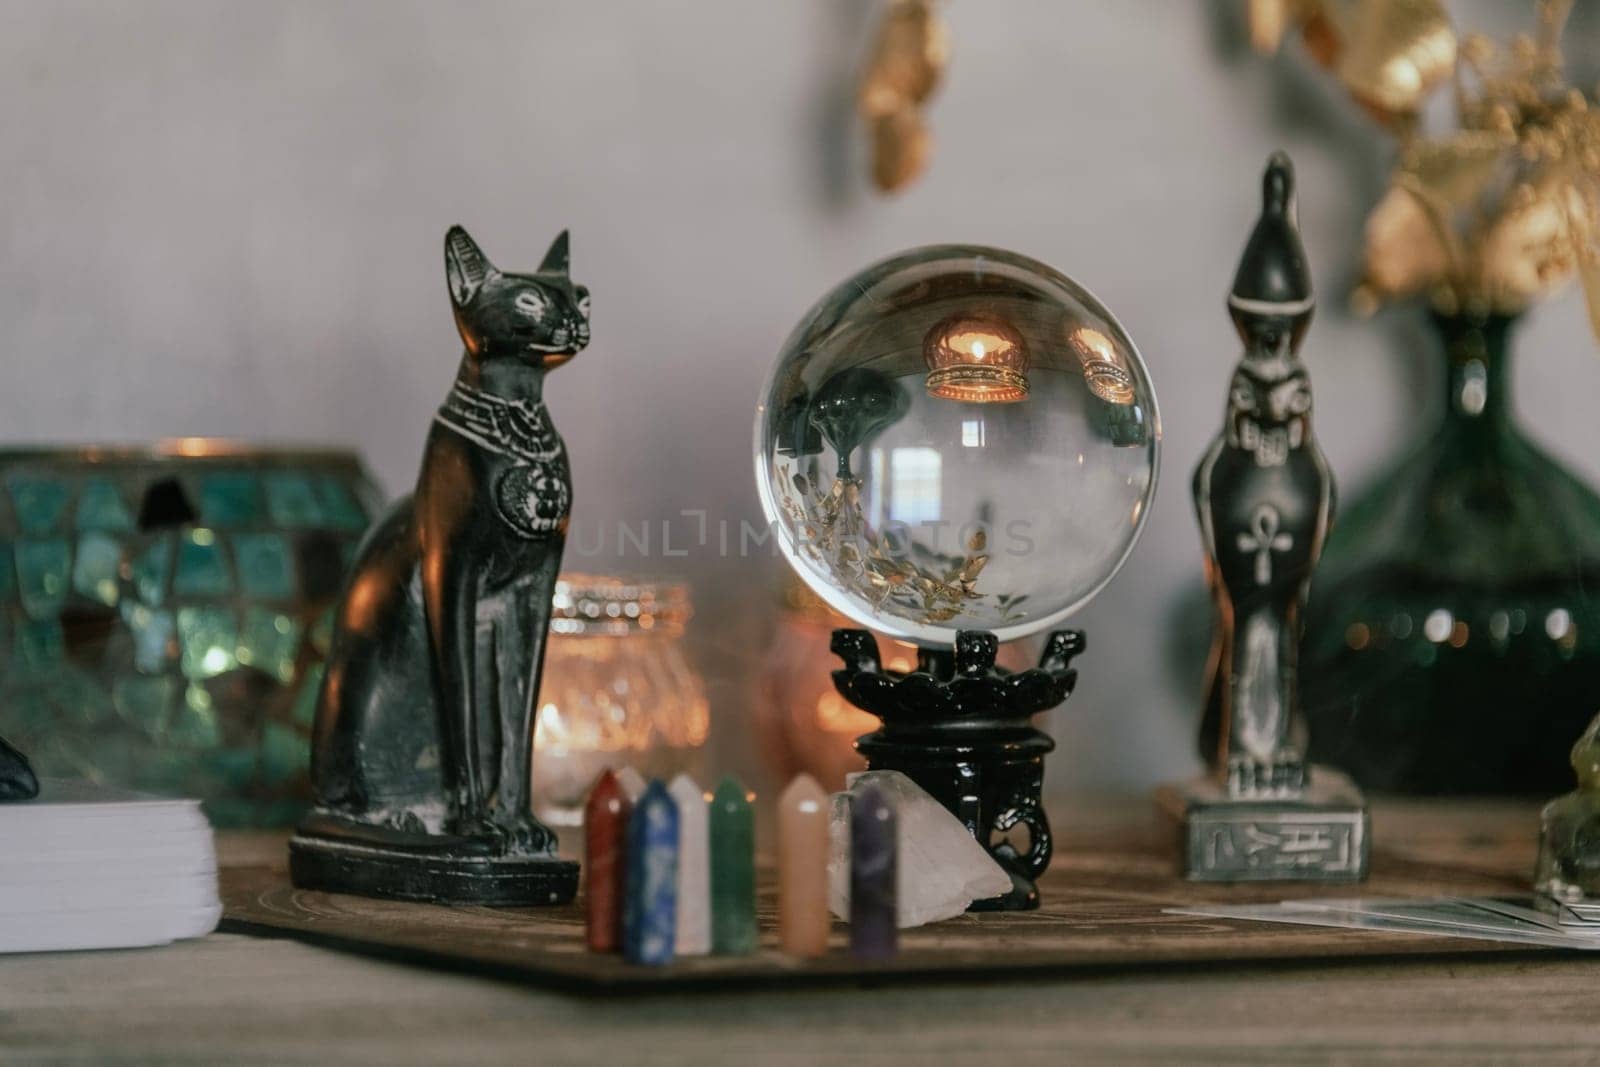 An atmospheric setting featuring a crystal ball, Egyptian cat statues, candles, and crystals, creating a mystical ambiance. by jbruiz78